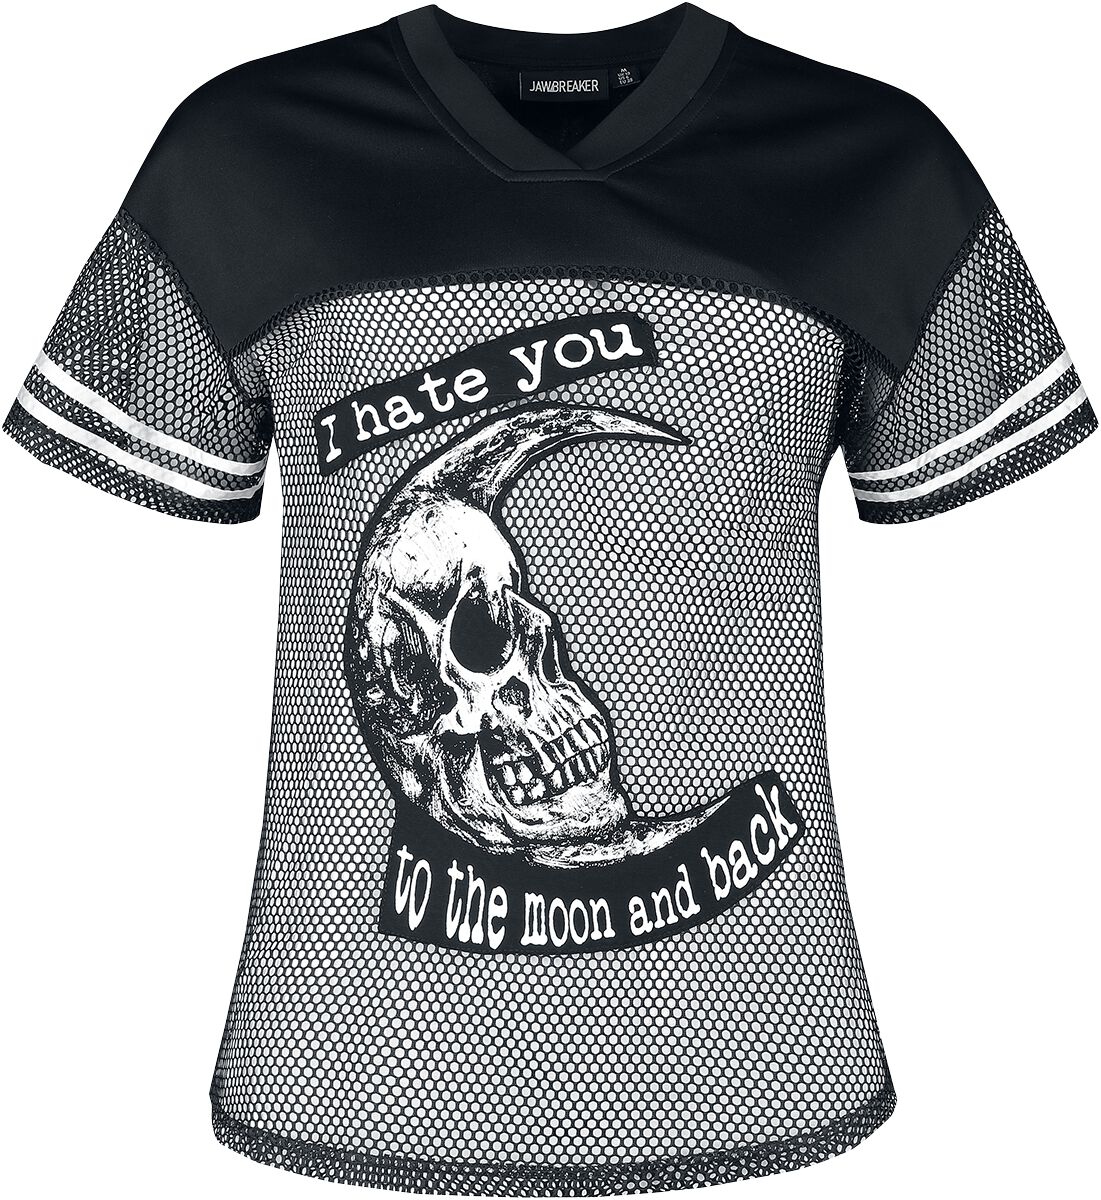 Image of T-Shirt Gothic di Jawbreaker - To the moon and back t-shirt - XS a XXL - Donna - nero/bianco